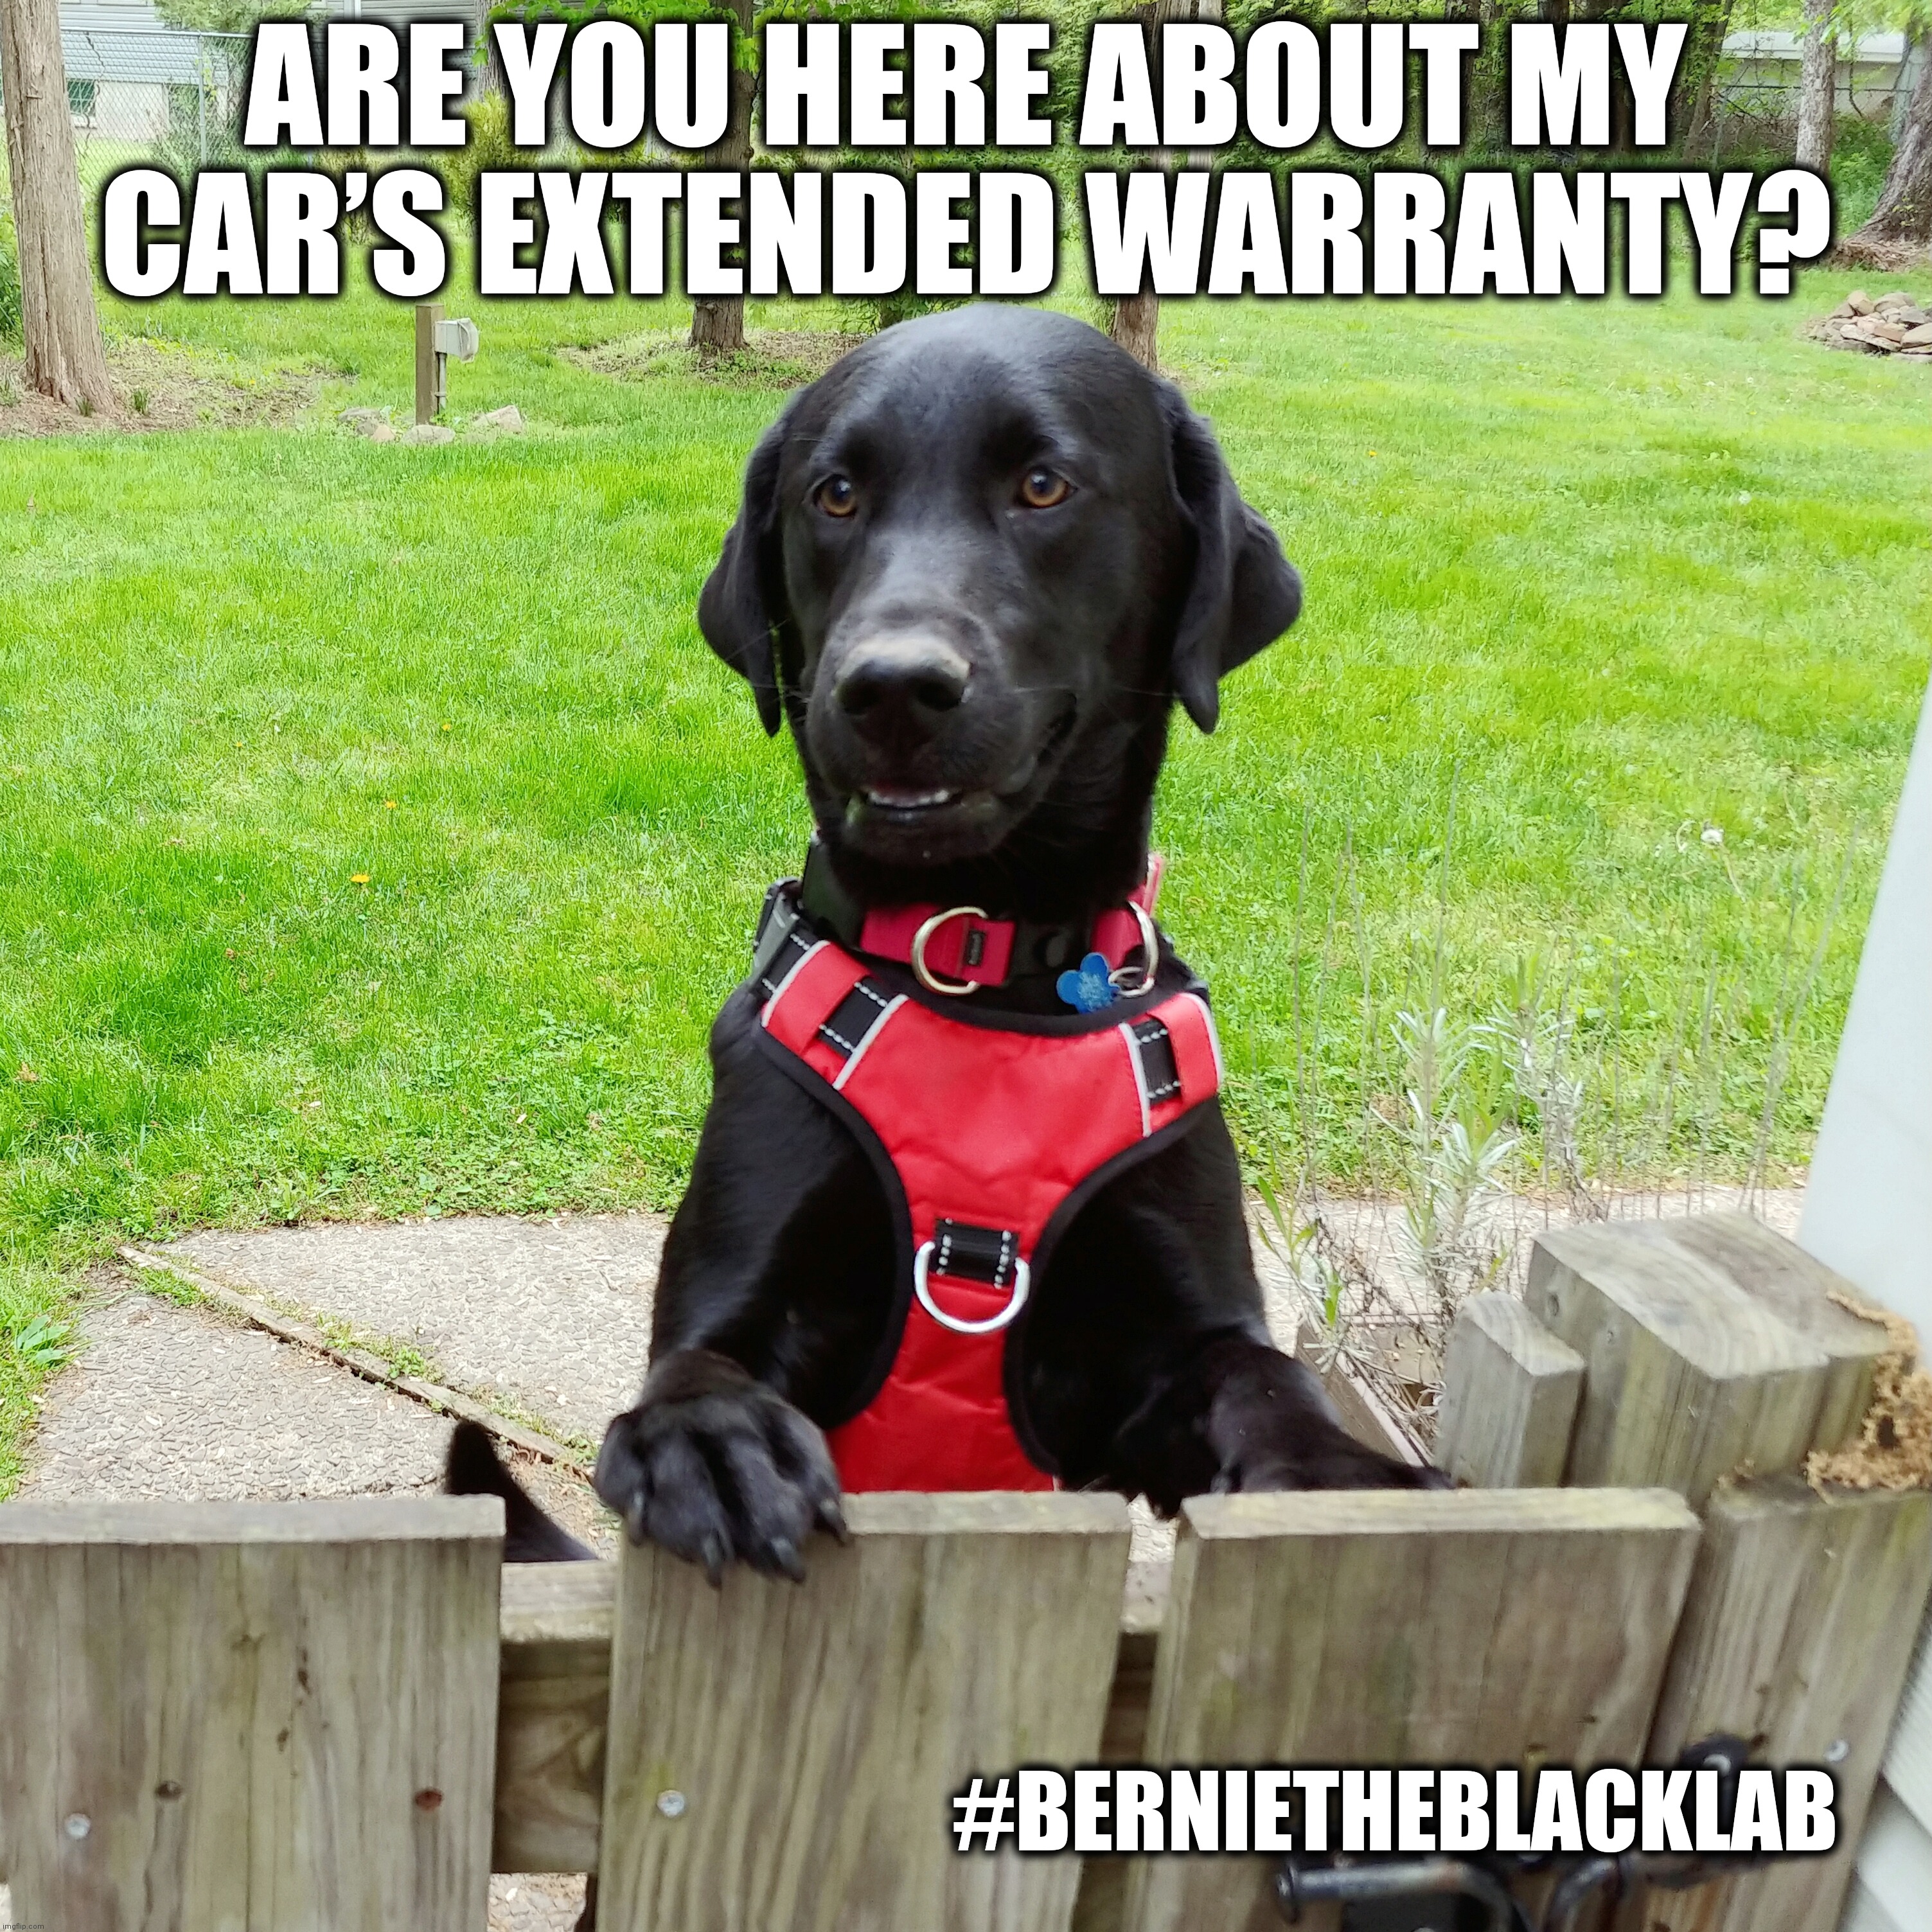 Are you here about my car’s extended warranty? | ARE YOU HERE ABOUT MY CAR’S EXTENDED WARRANTY? #BERNIETHEBLACKLAB | image tagged in funny,memes,dog,cute,extended warranty,bernie | made w/ Imgflip meme maker